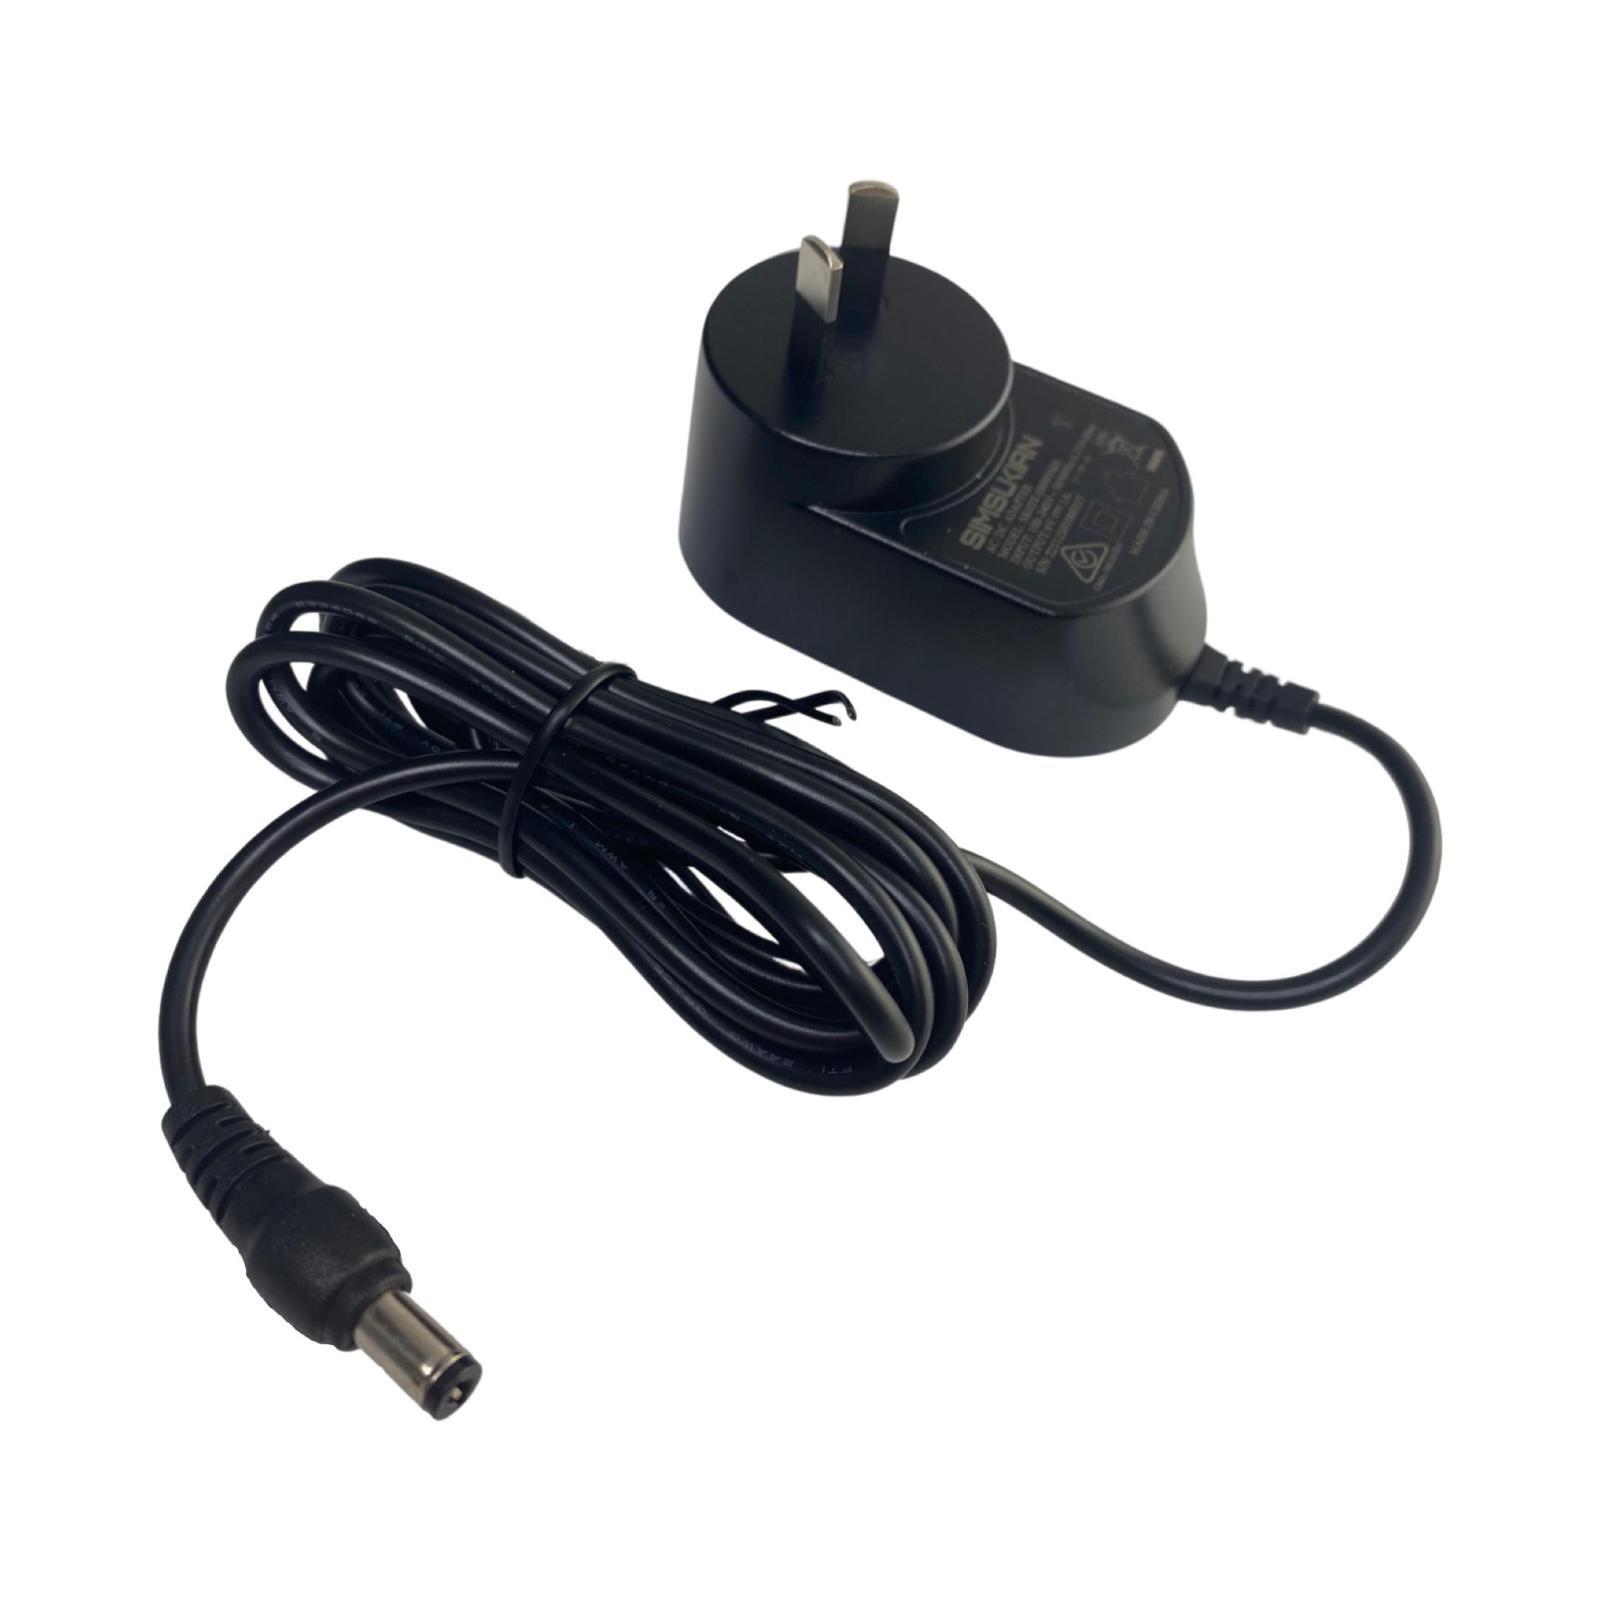 9V DC 1A Power Adapter with 2.1 DC Plug